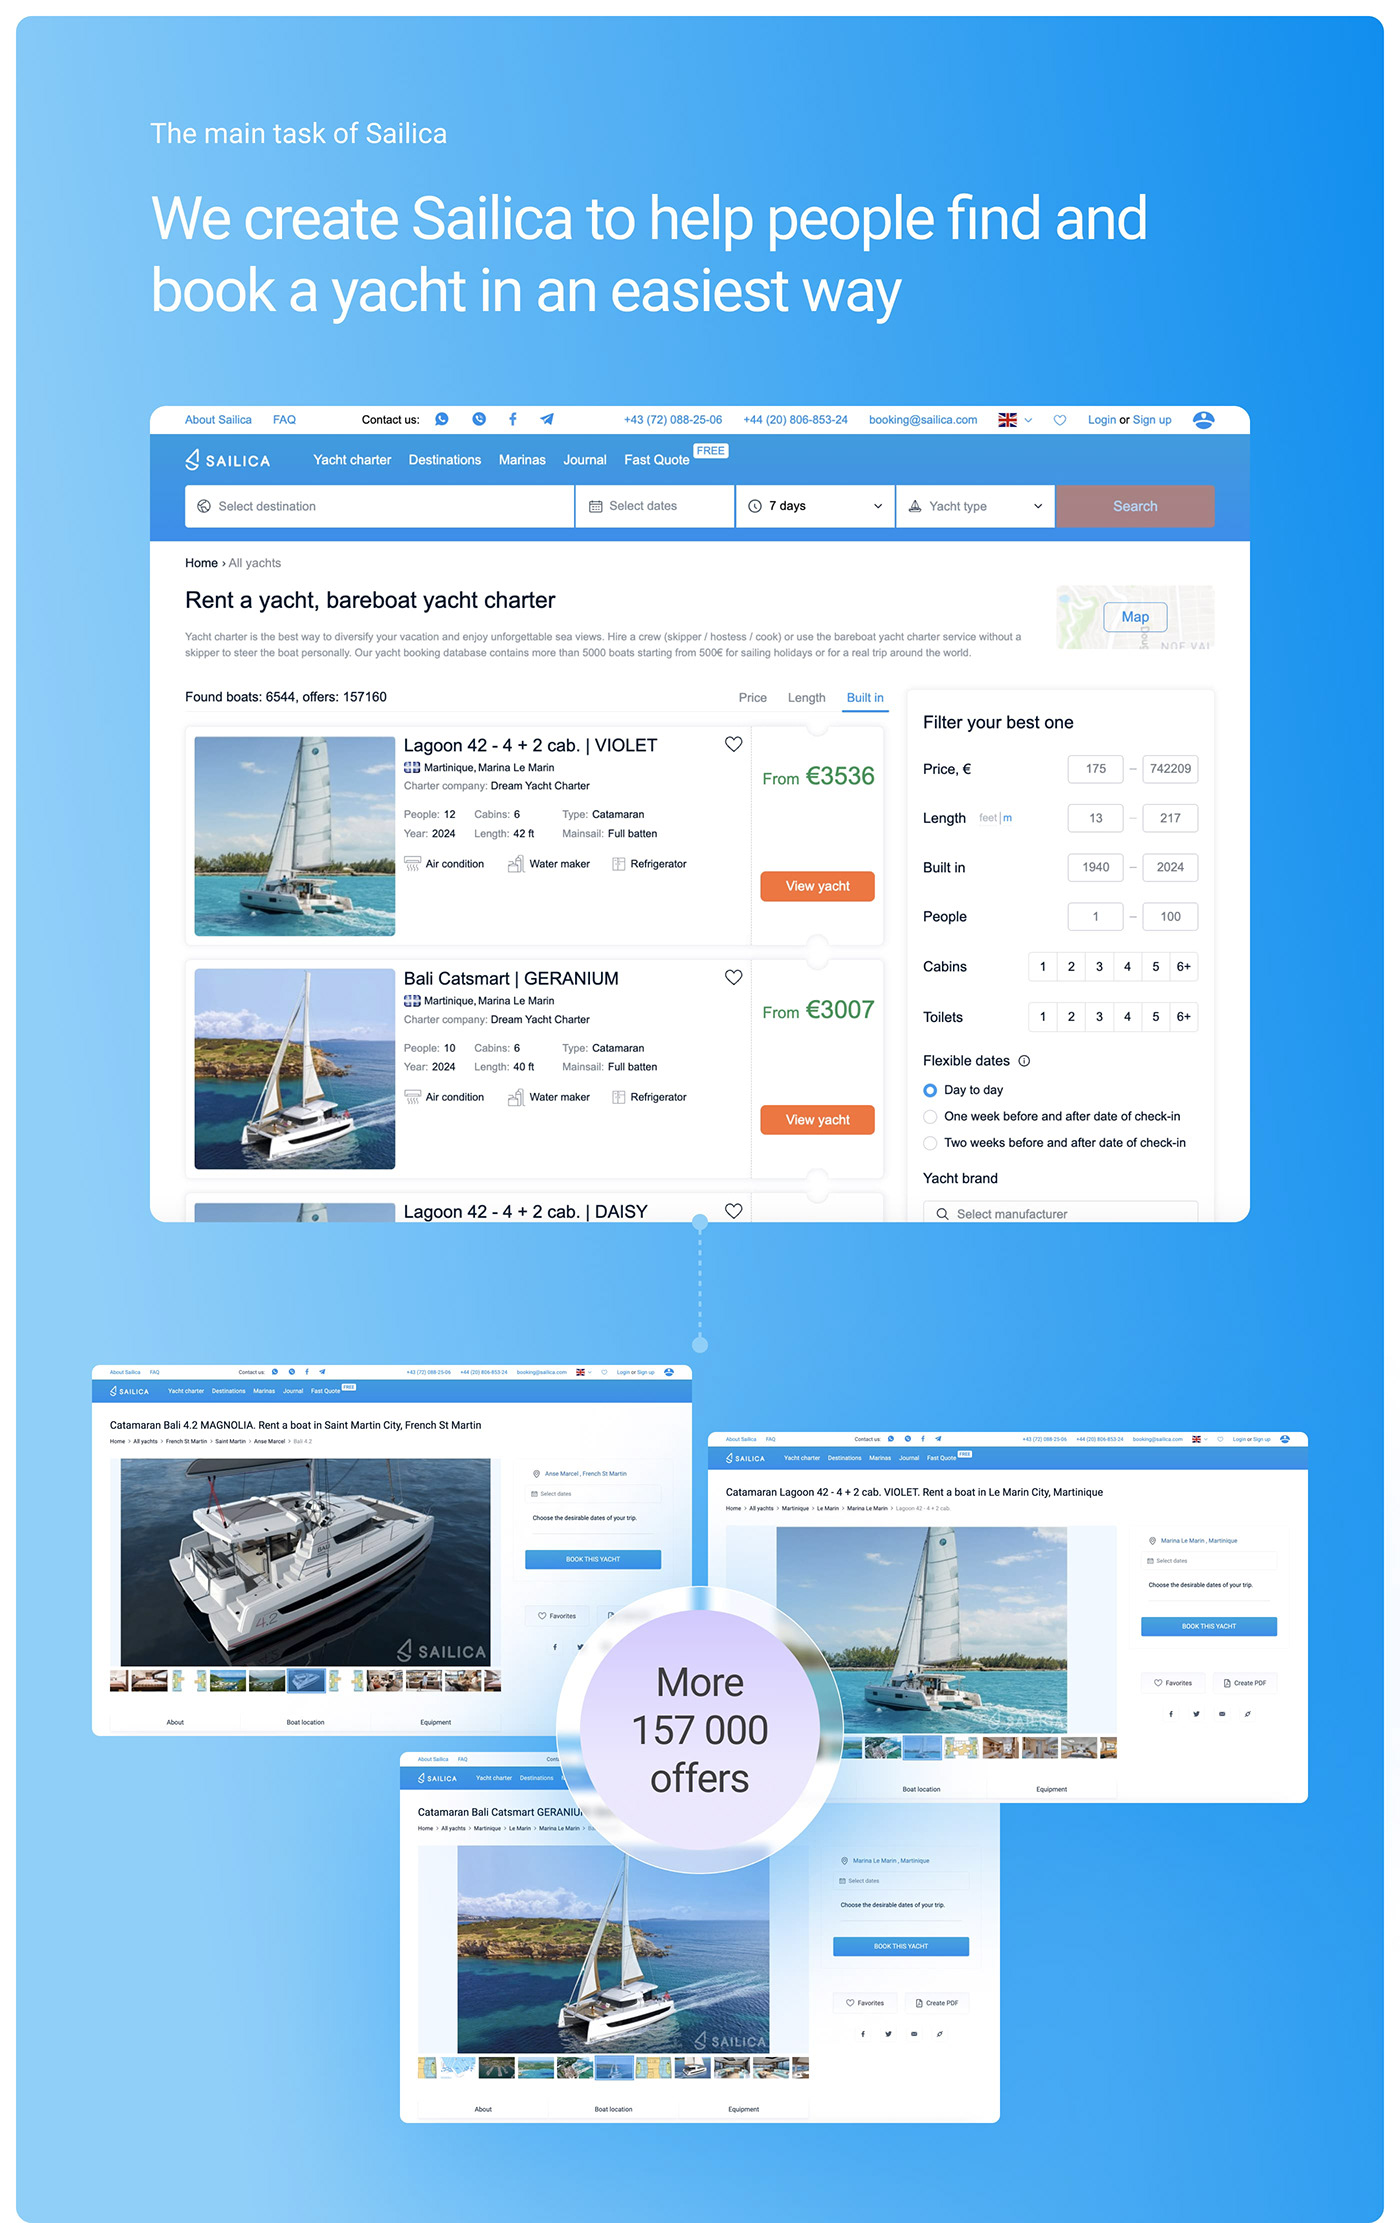 Sailica helps people find and book a yacht